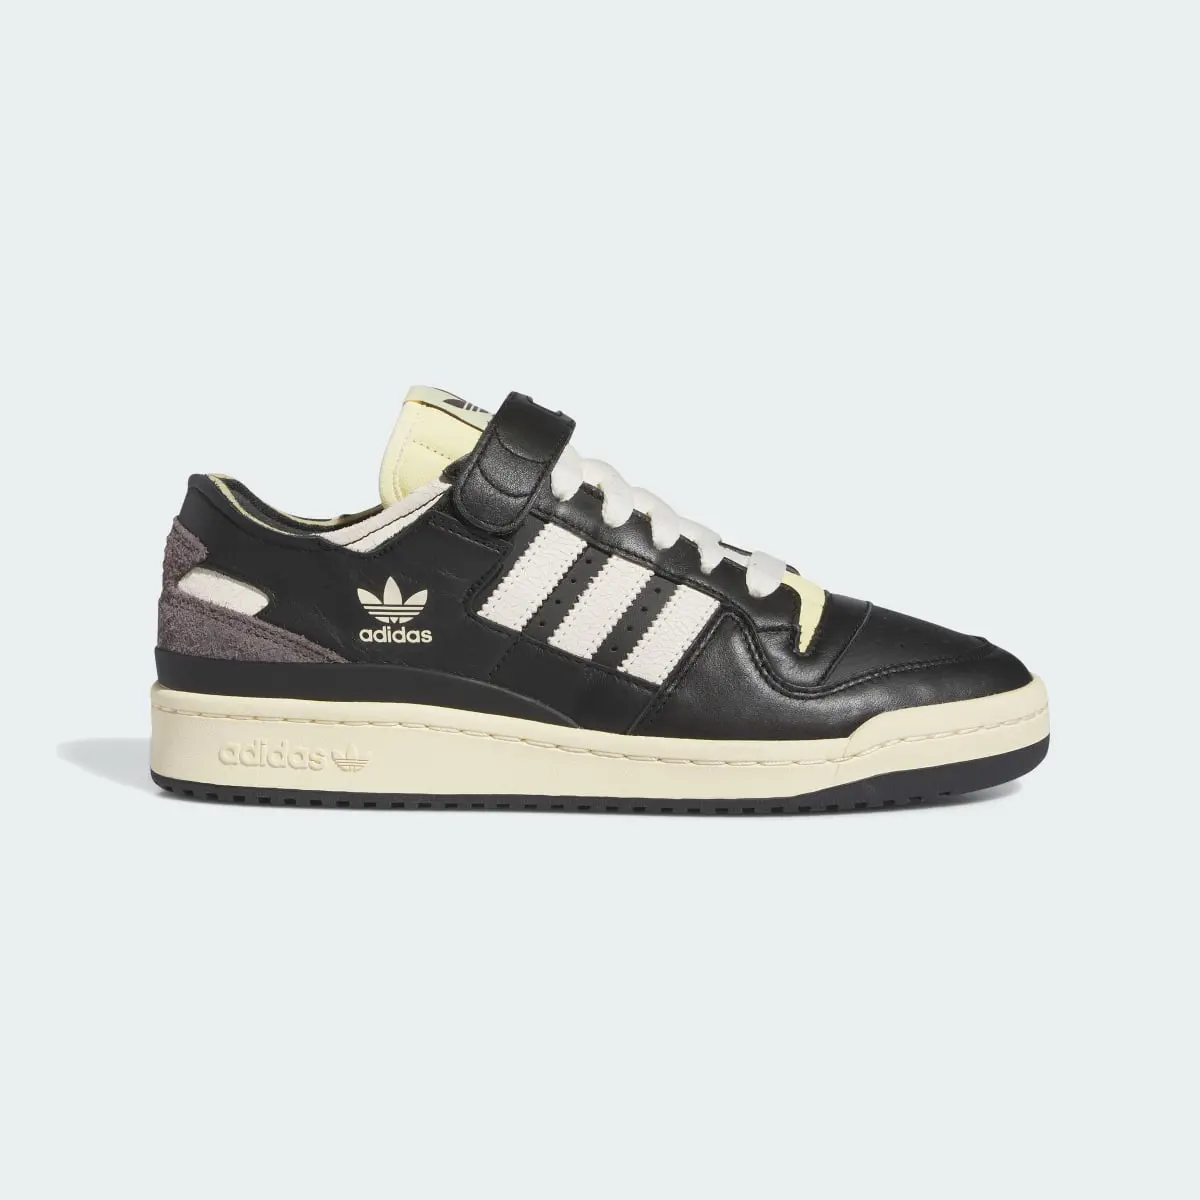 Adidas Forum 84 Low Shoes. 2